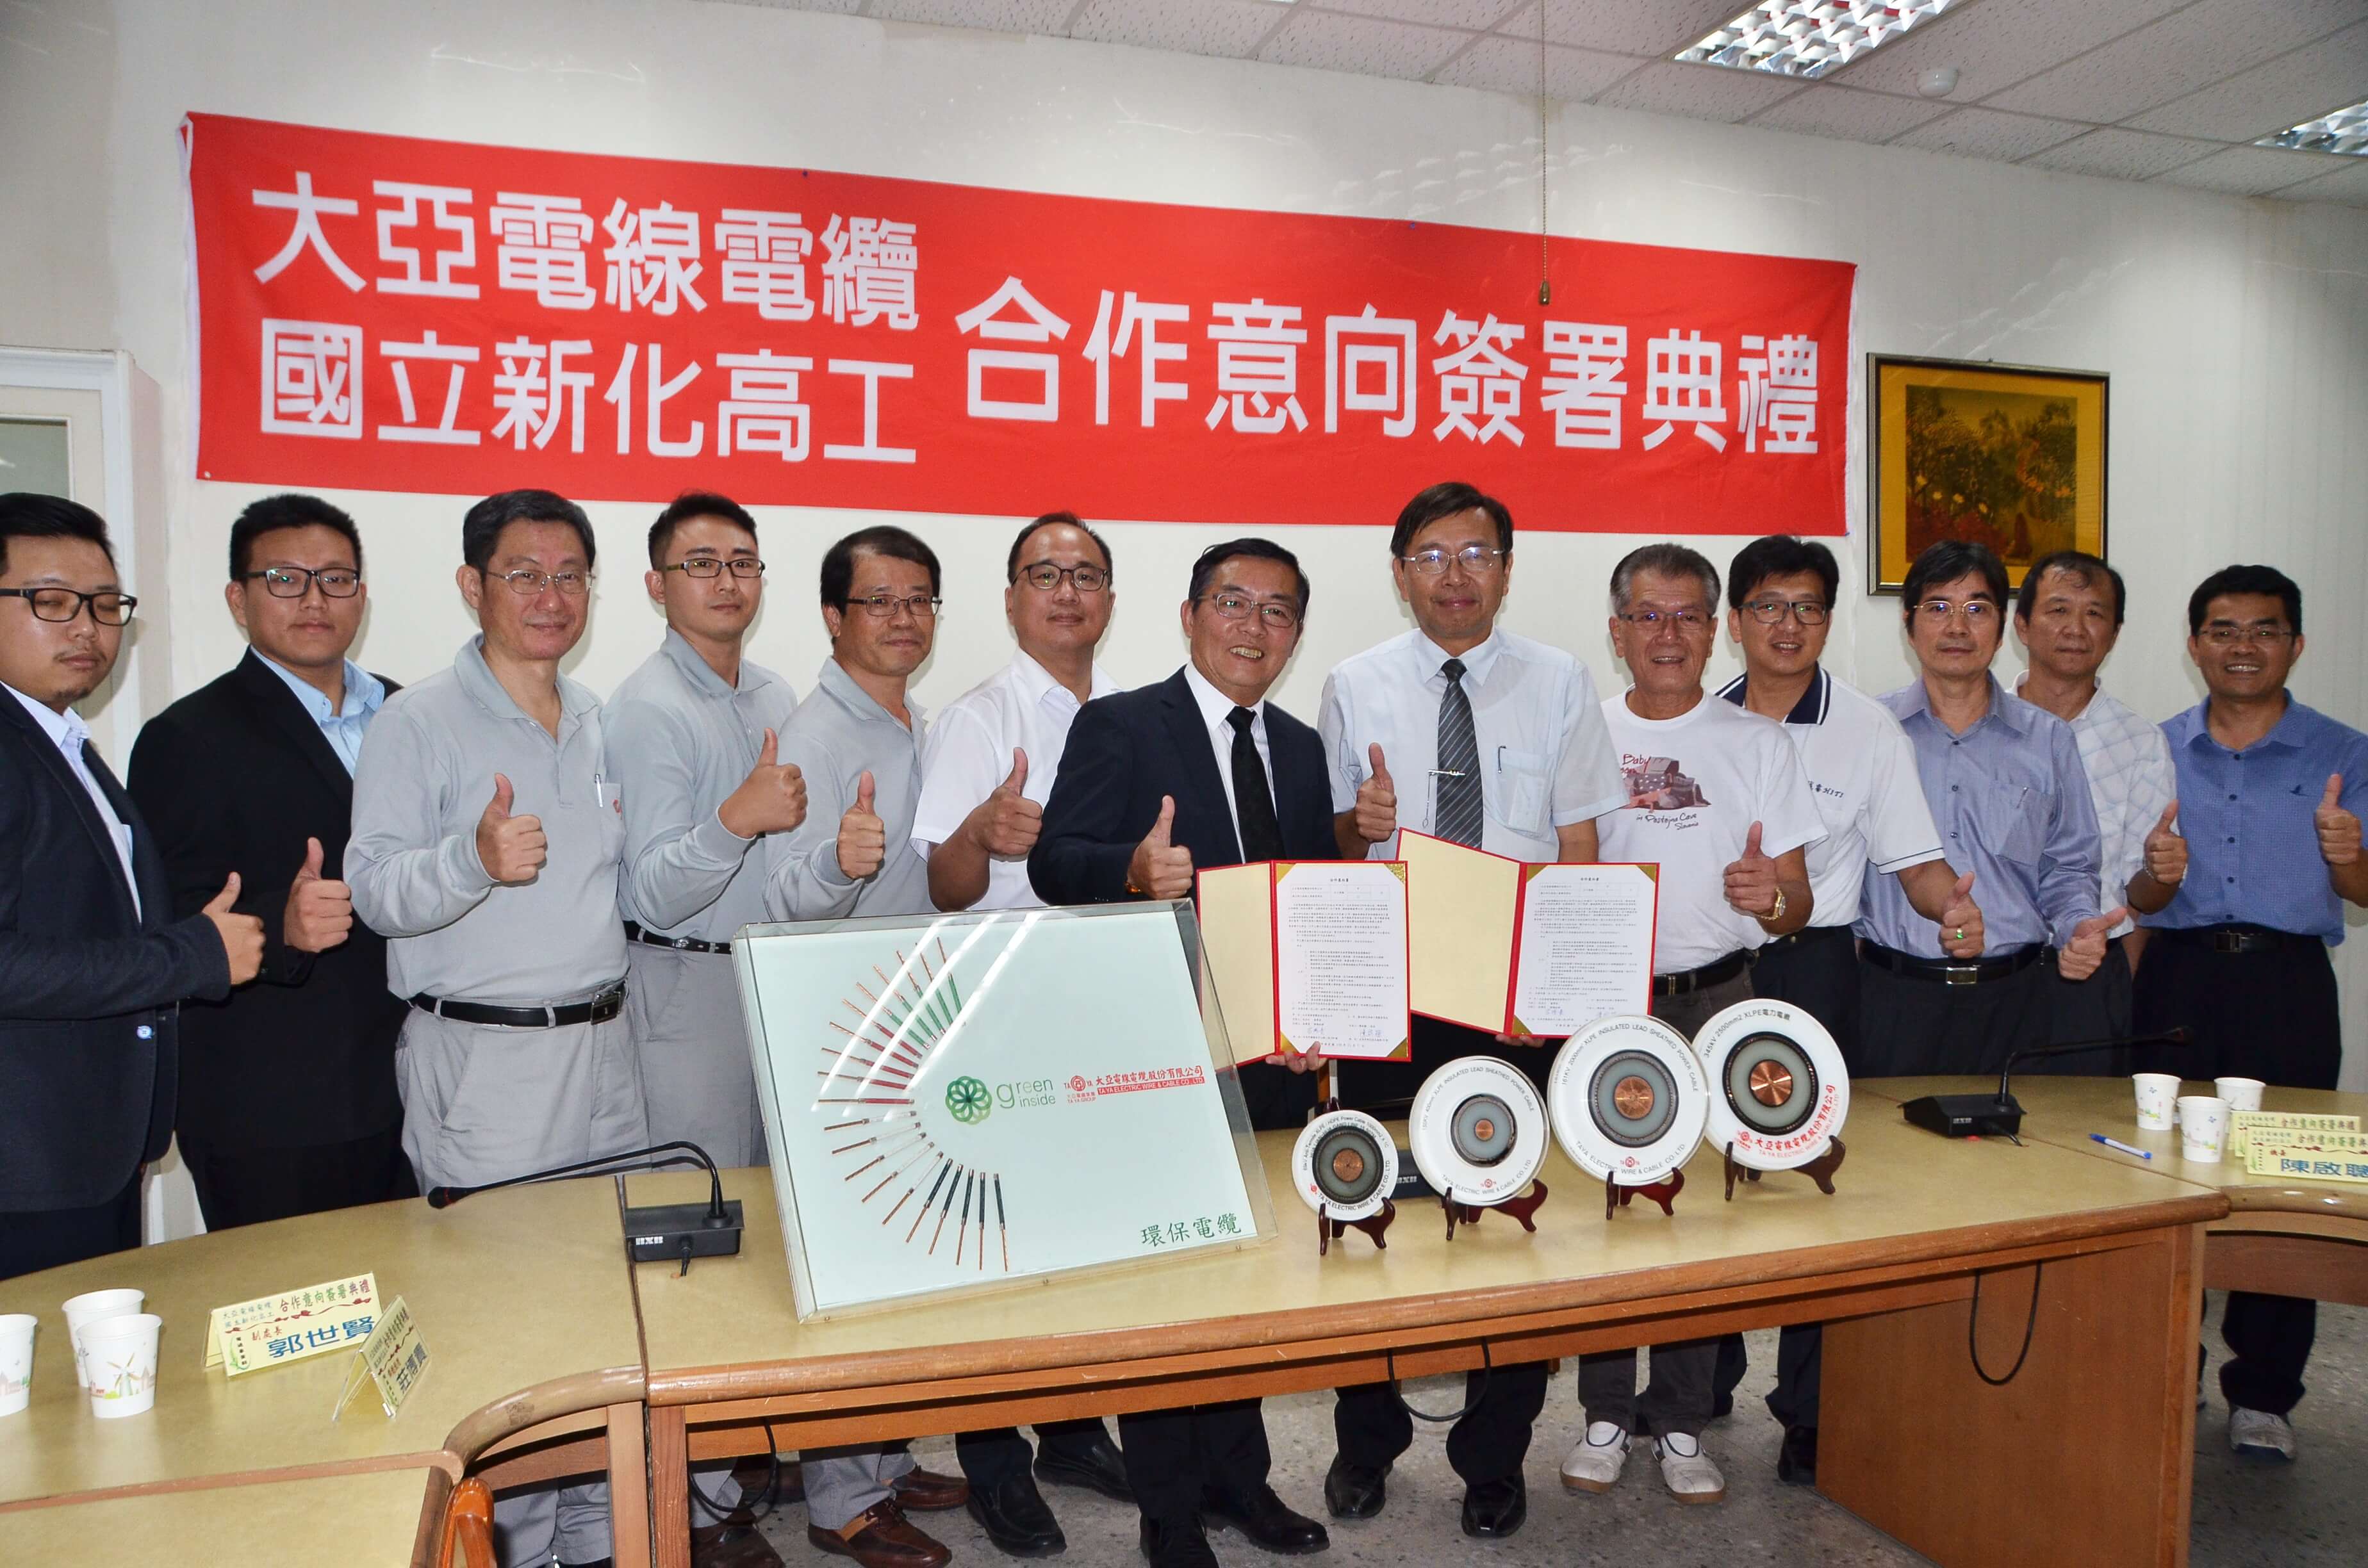 Taya provides free wires and cables to National Hsin Hua Industrial Vocational High School to advance vocational education in Taiwan[Industry-Academia Collaboration]